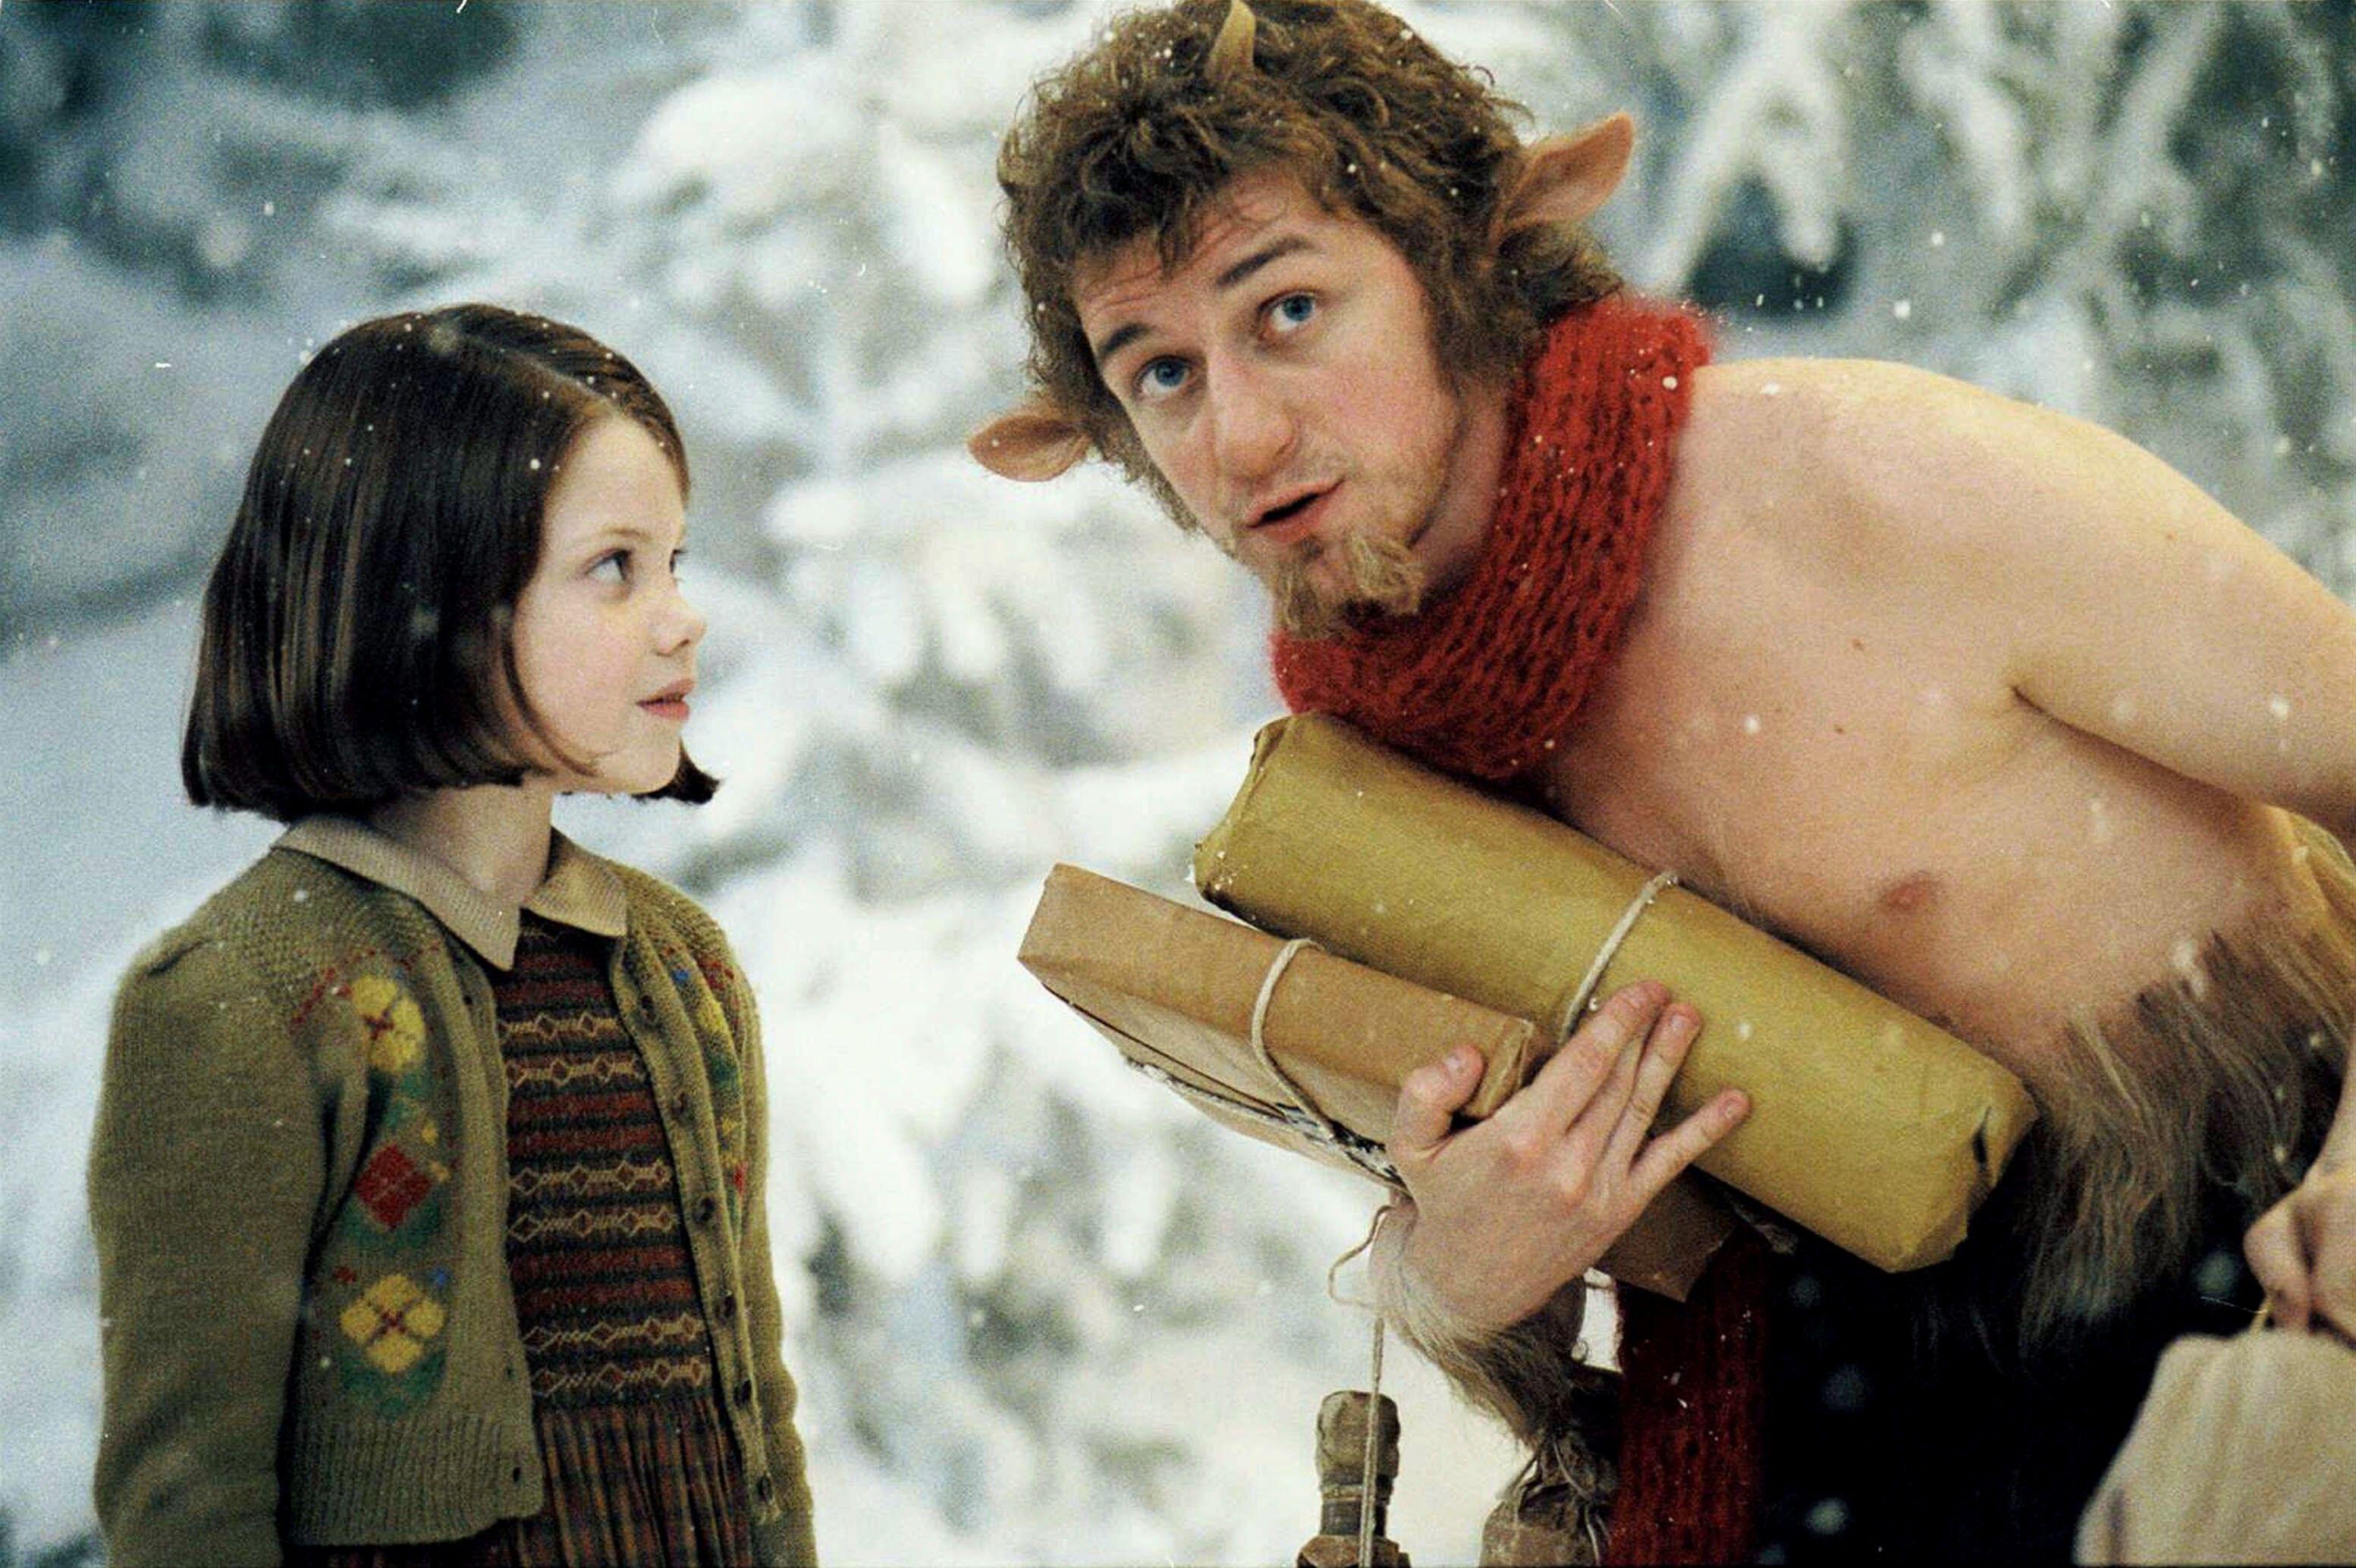 Georgie Henley as Lucy Pevensie encounters baby deer James McAvoy as Mr. Tumnus in the snow in The Chronicles of Narnia: The Lion, the Witch, and the Wardrobe.